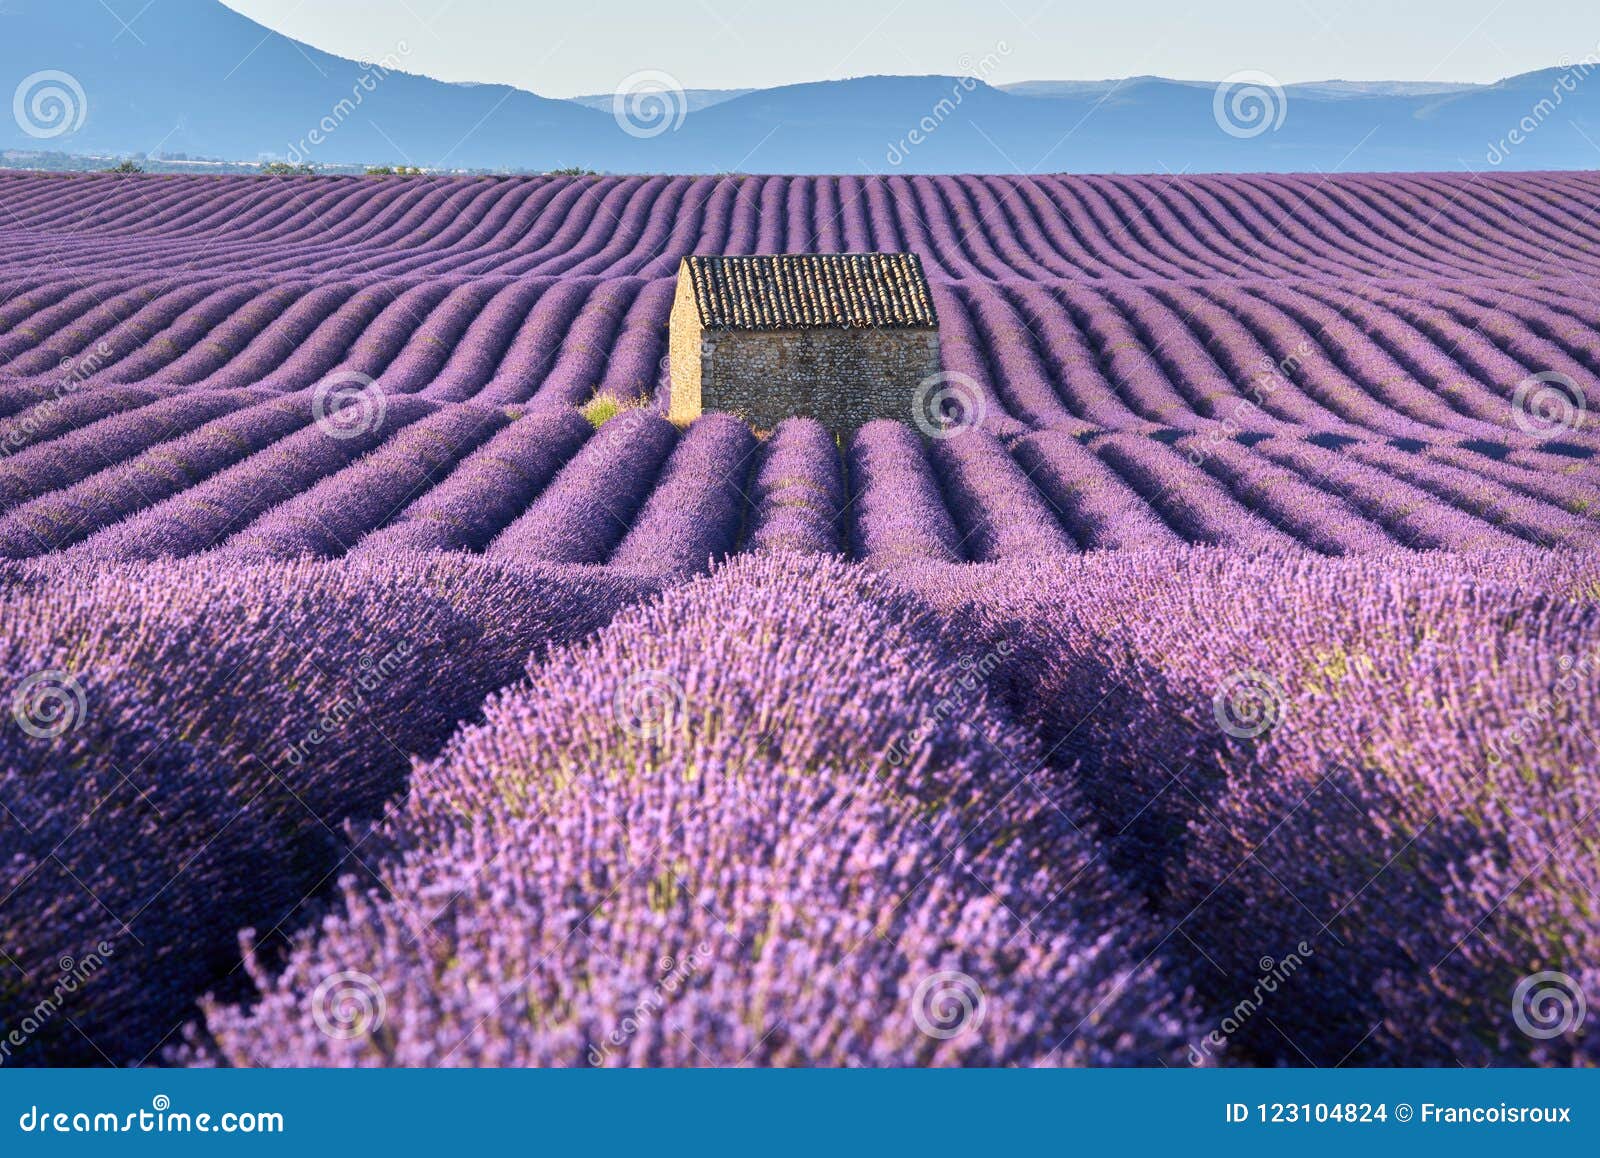 lavender fields in valensole with stone house in summer. alpes-de-haute-provence, france